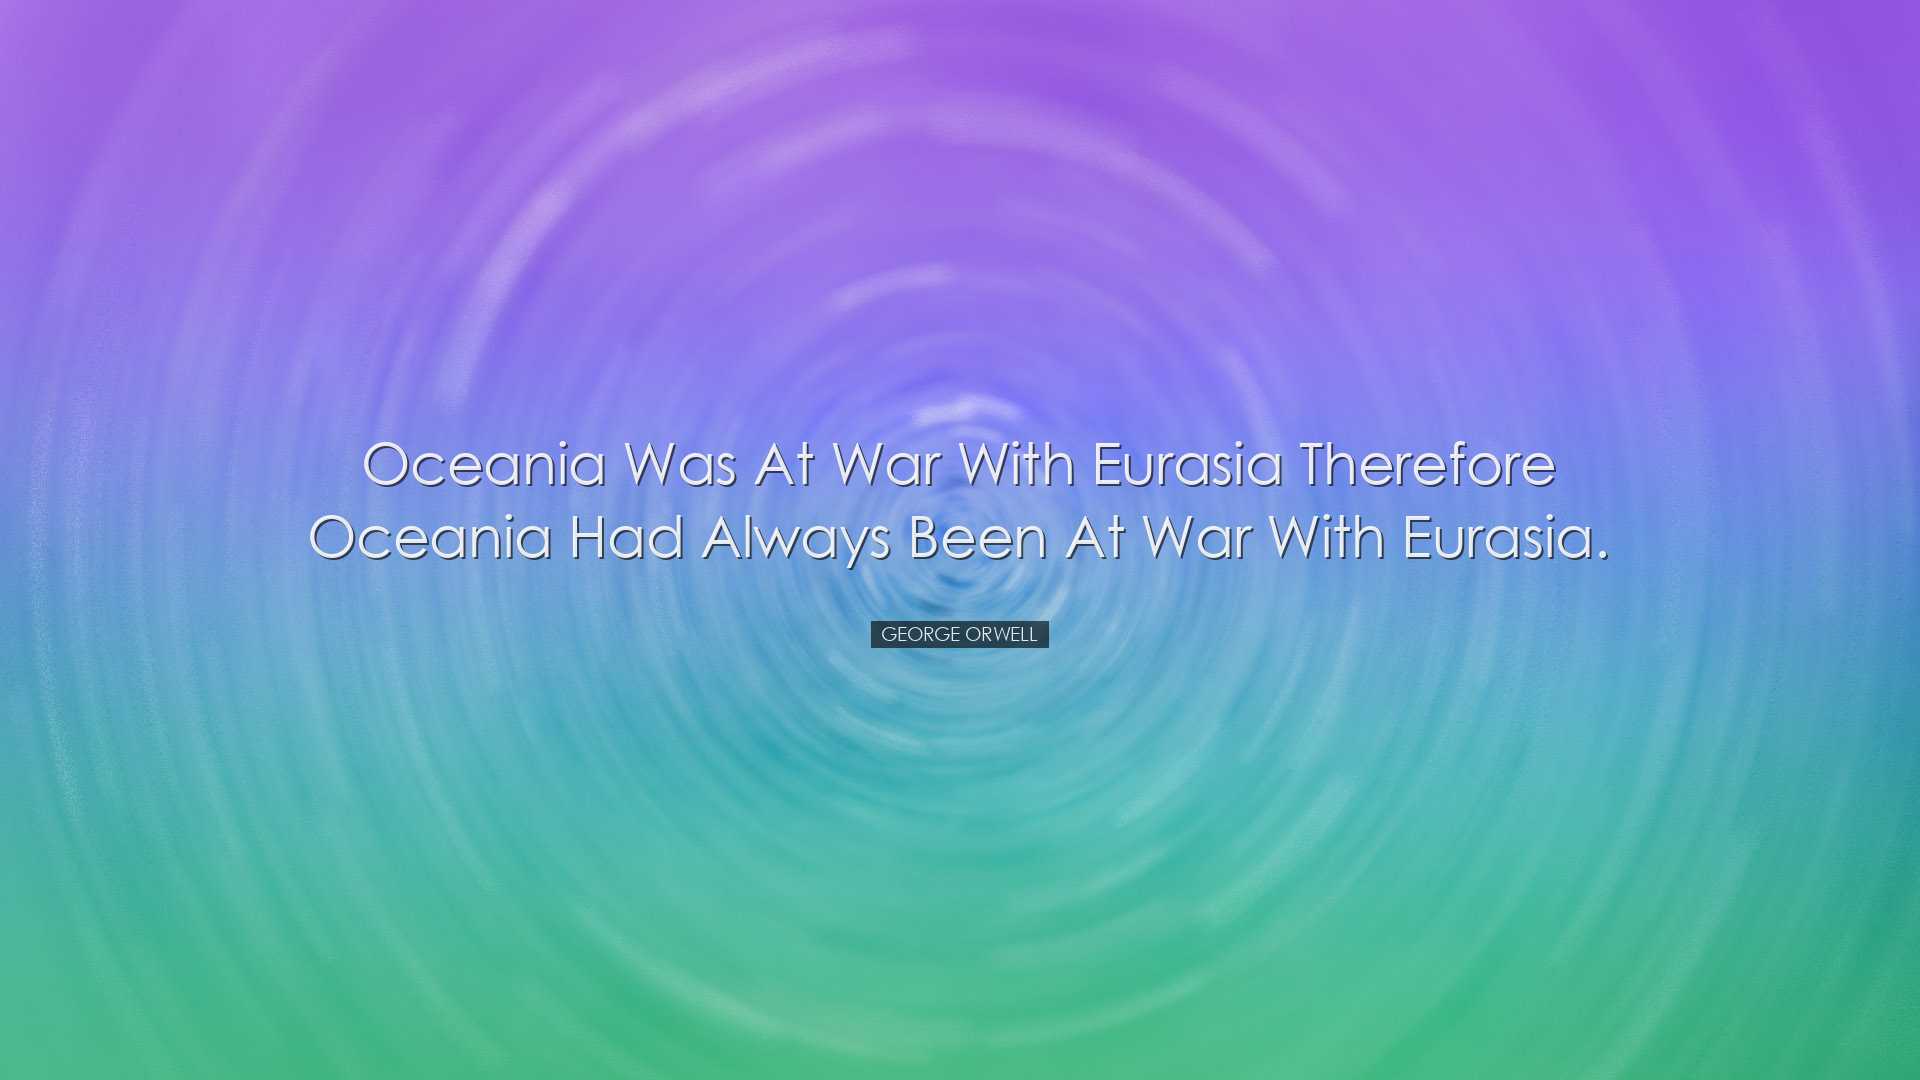 Oceania was at war with Eurasia therefore Oceania had always been